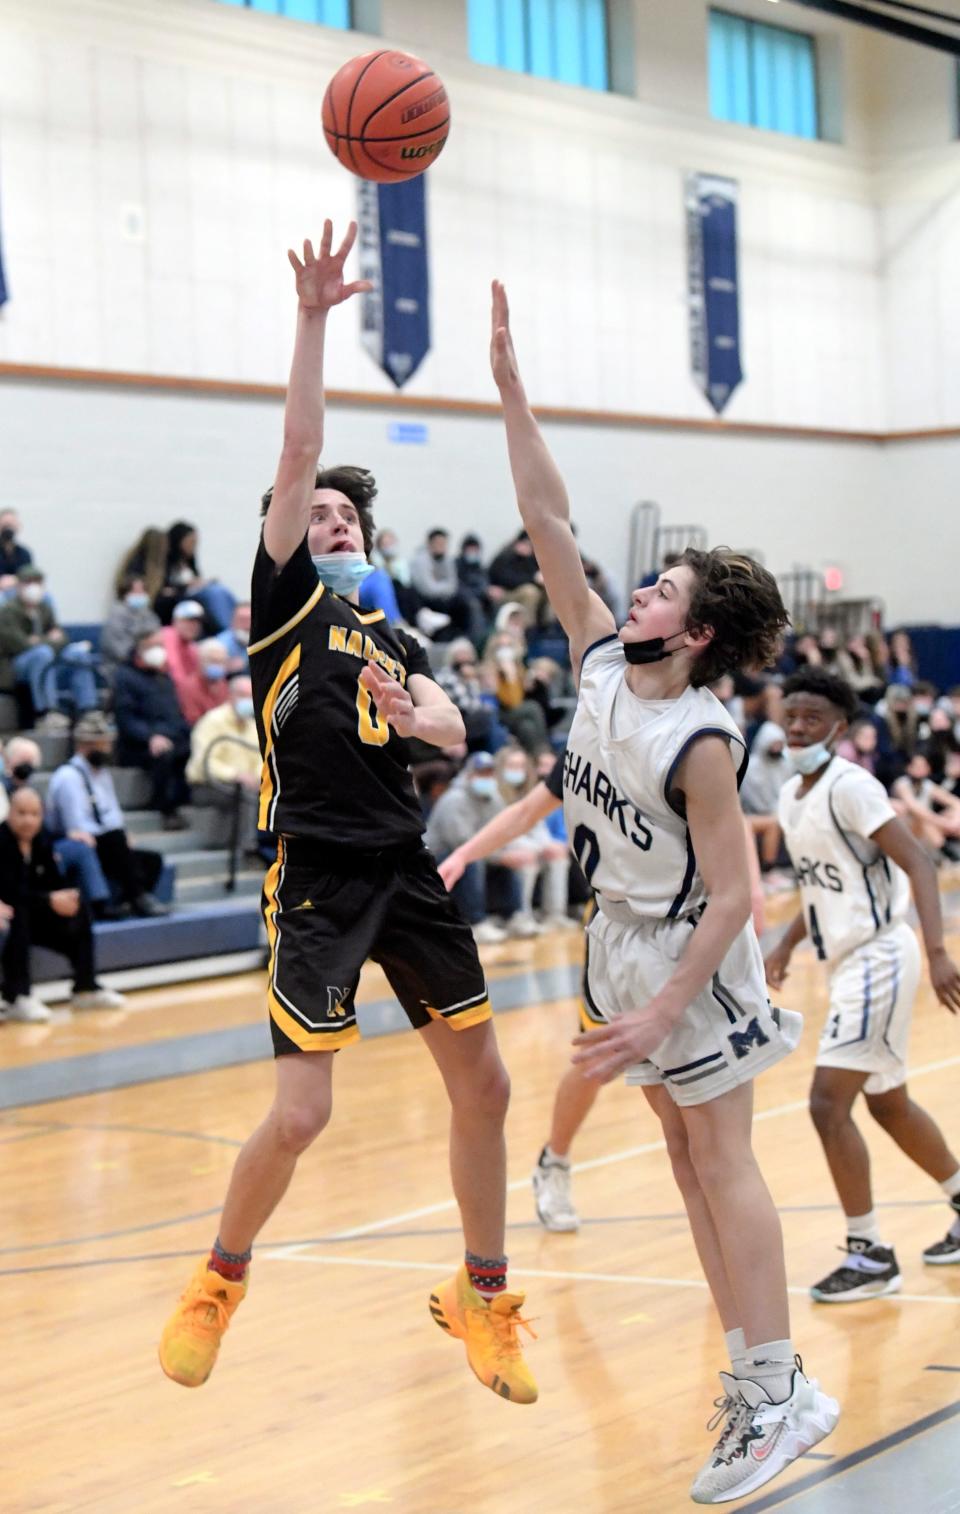 Jeffrey McCarthy of Nauset shoots over Jackson Rocco of Monomoy in this February 2022 game.